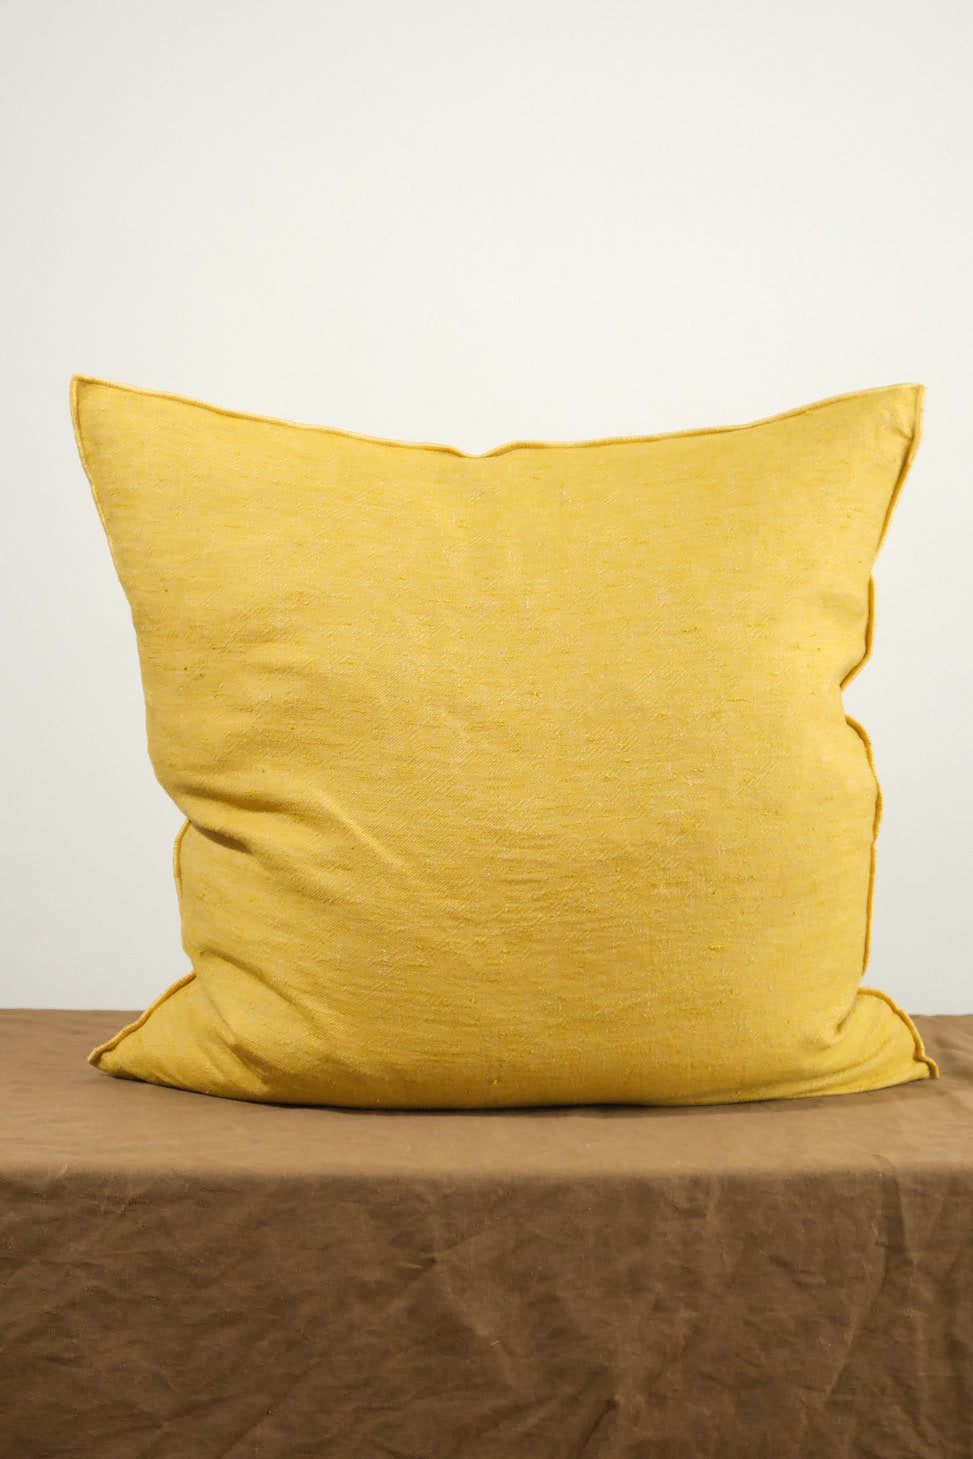 26" X 26" Crumpled Washed Linen Vice Versa Cushion in Ocre